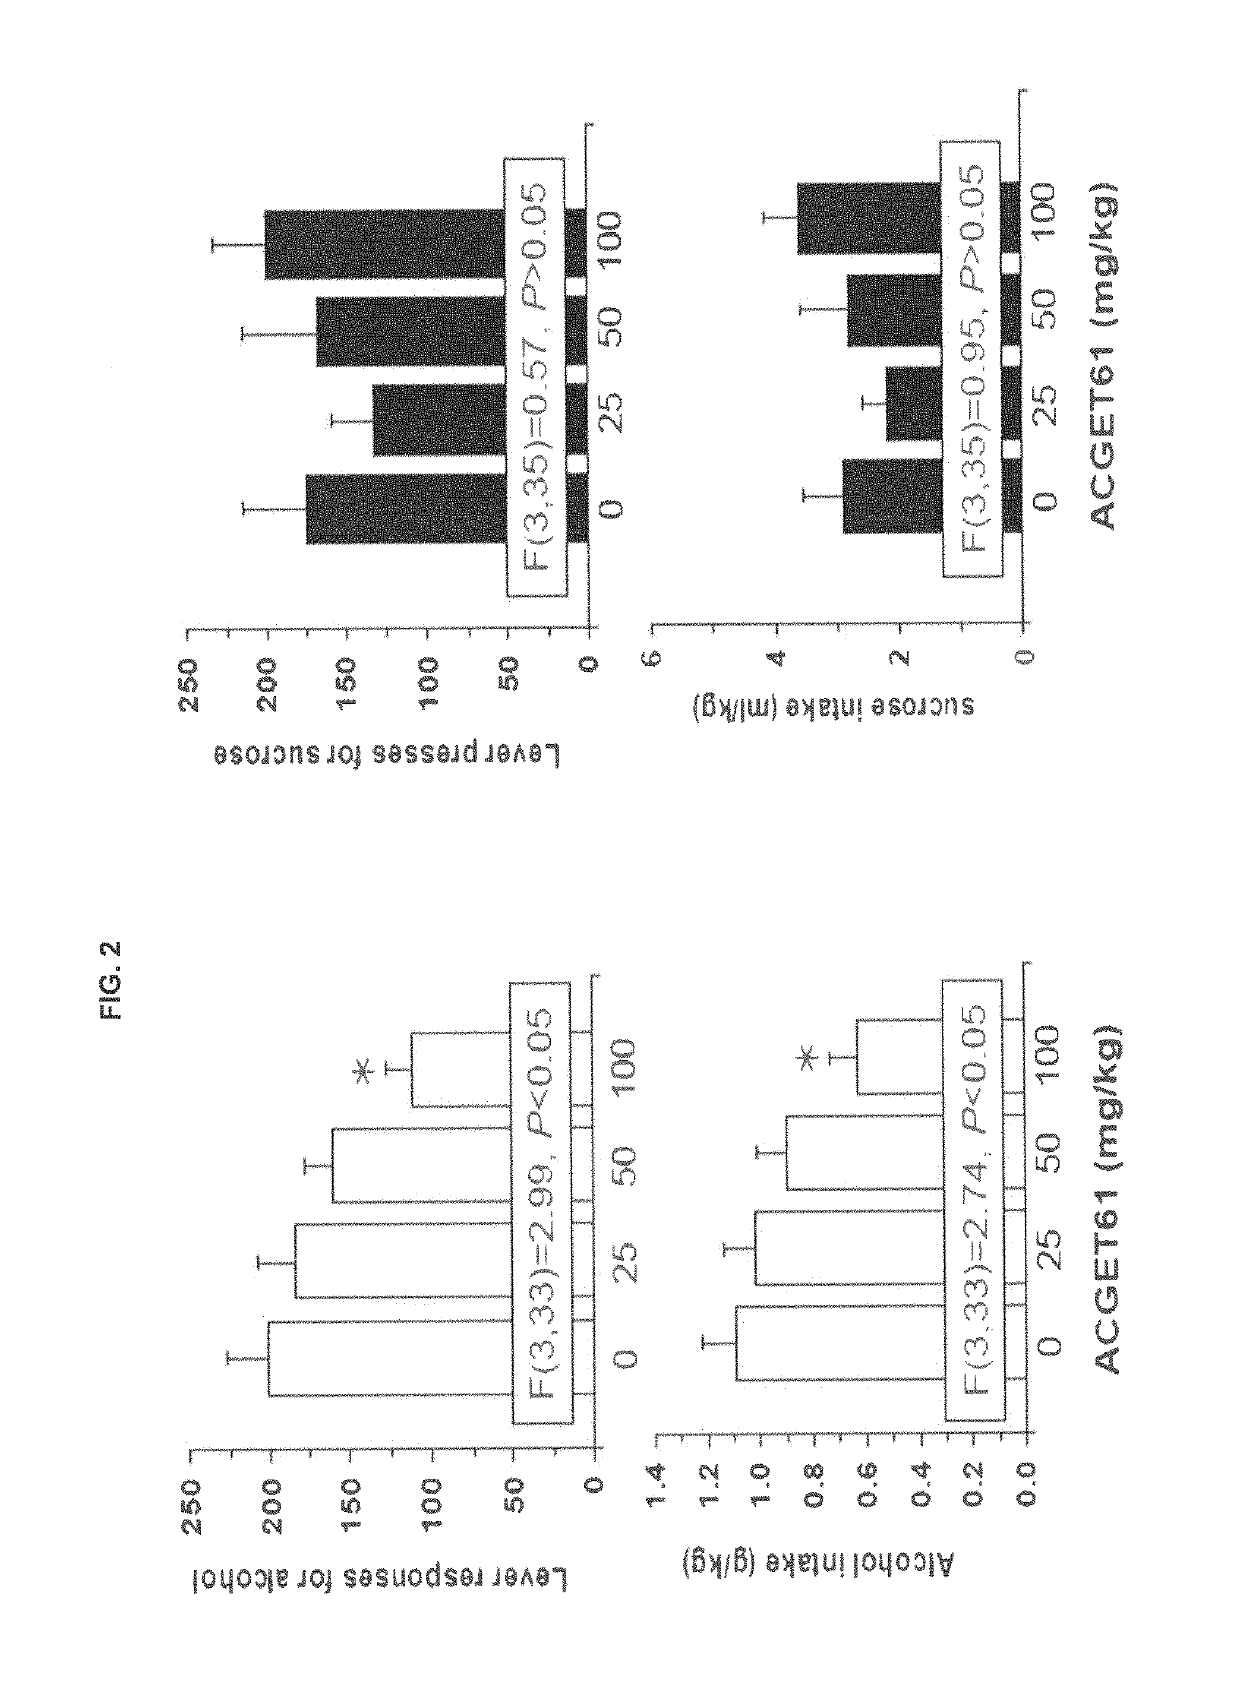 Selected amide of Y-hydroxybutyric acid and uses thereof in the treatment of alcohol misuse